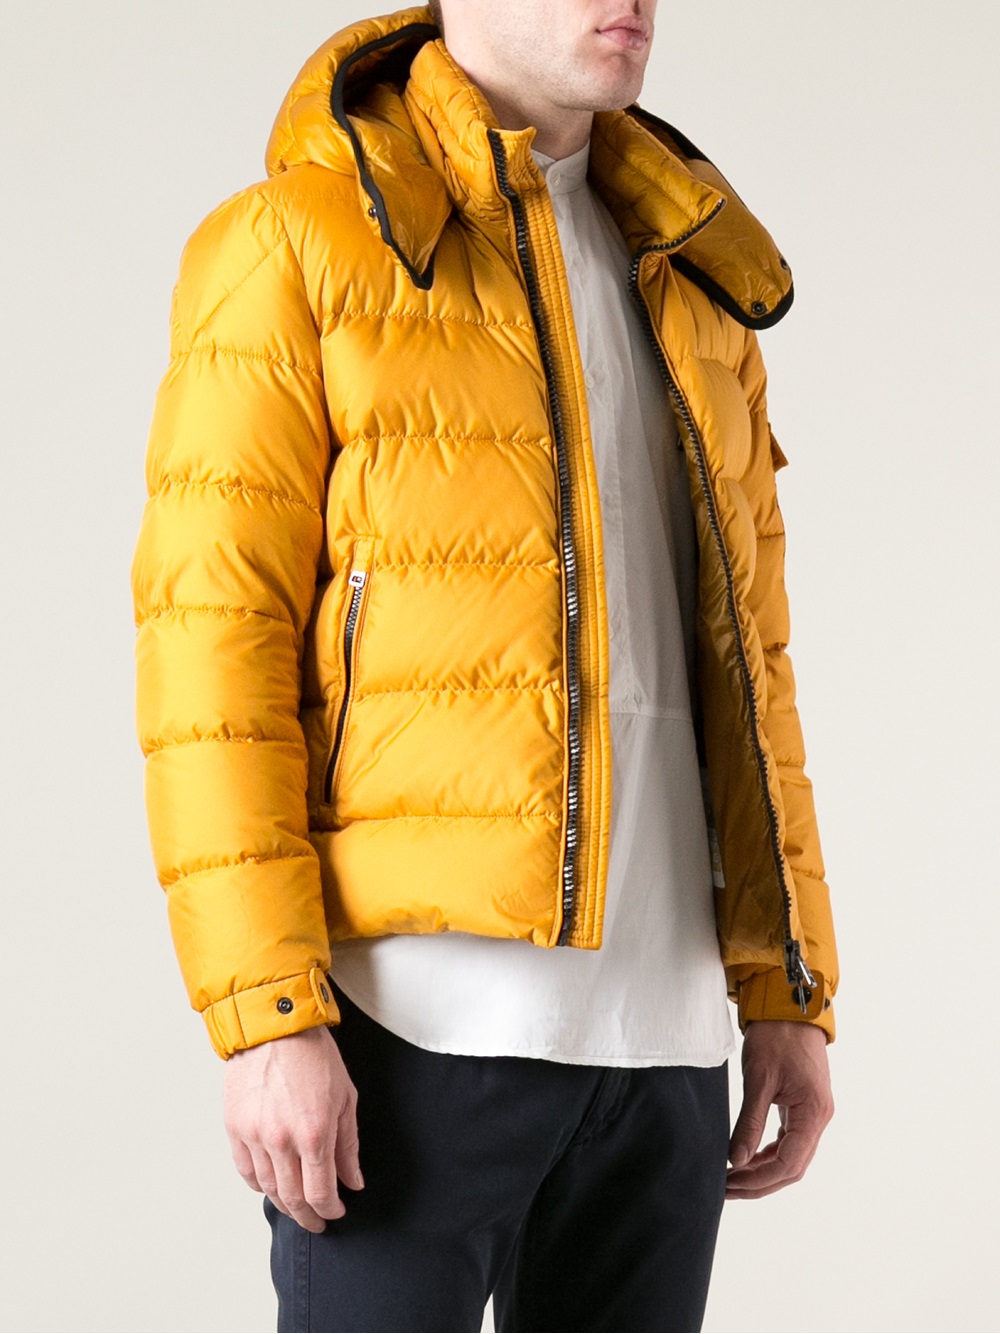 Moncler Hymalay Padded Jacket in Yellow & Orange (Yellow) for Men - Lyst